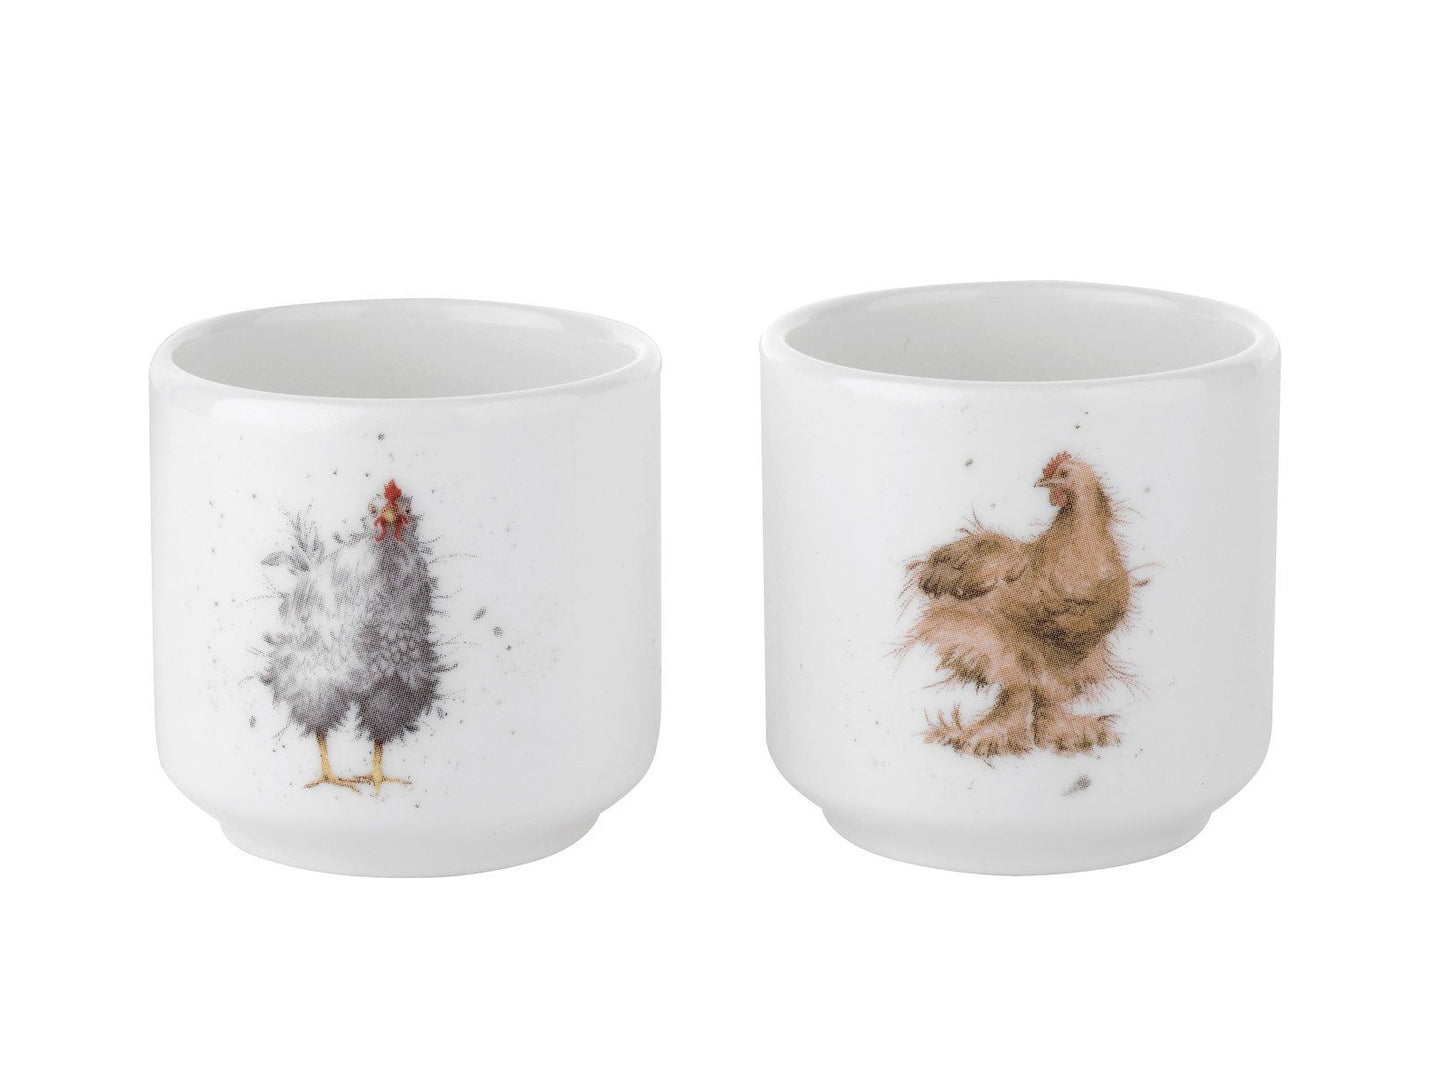 Royal Worcester Wrendale Egg Cups - Chickens (Set of 2)